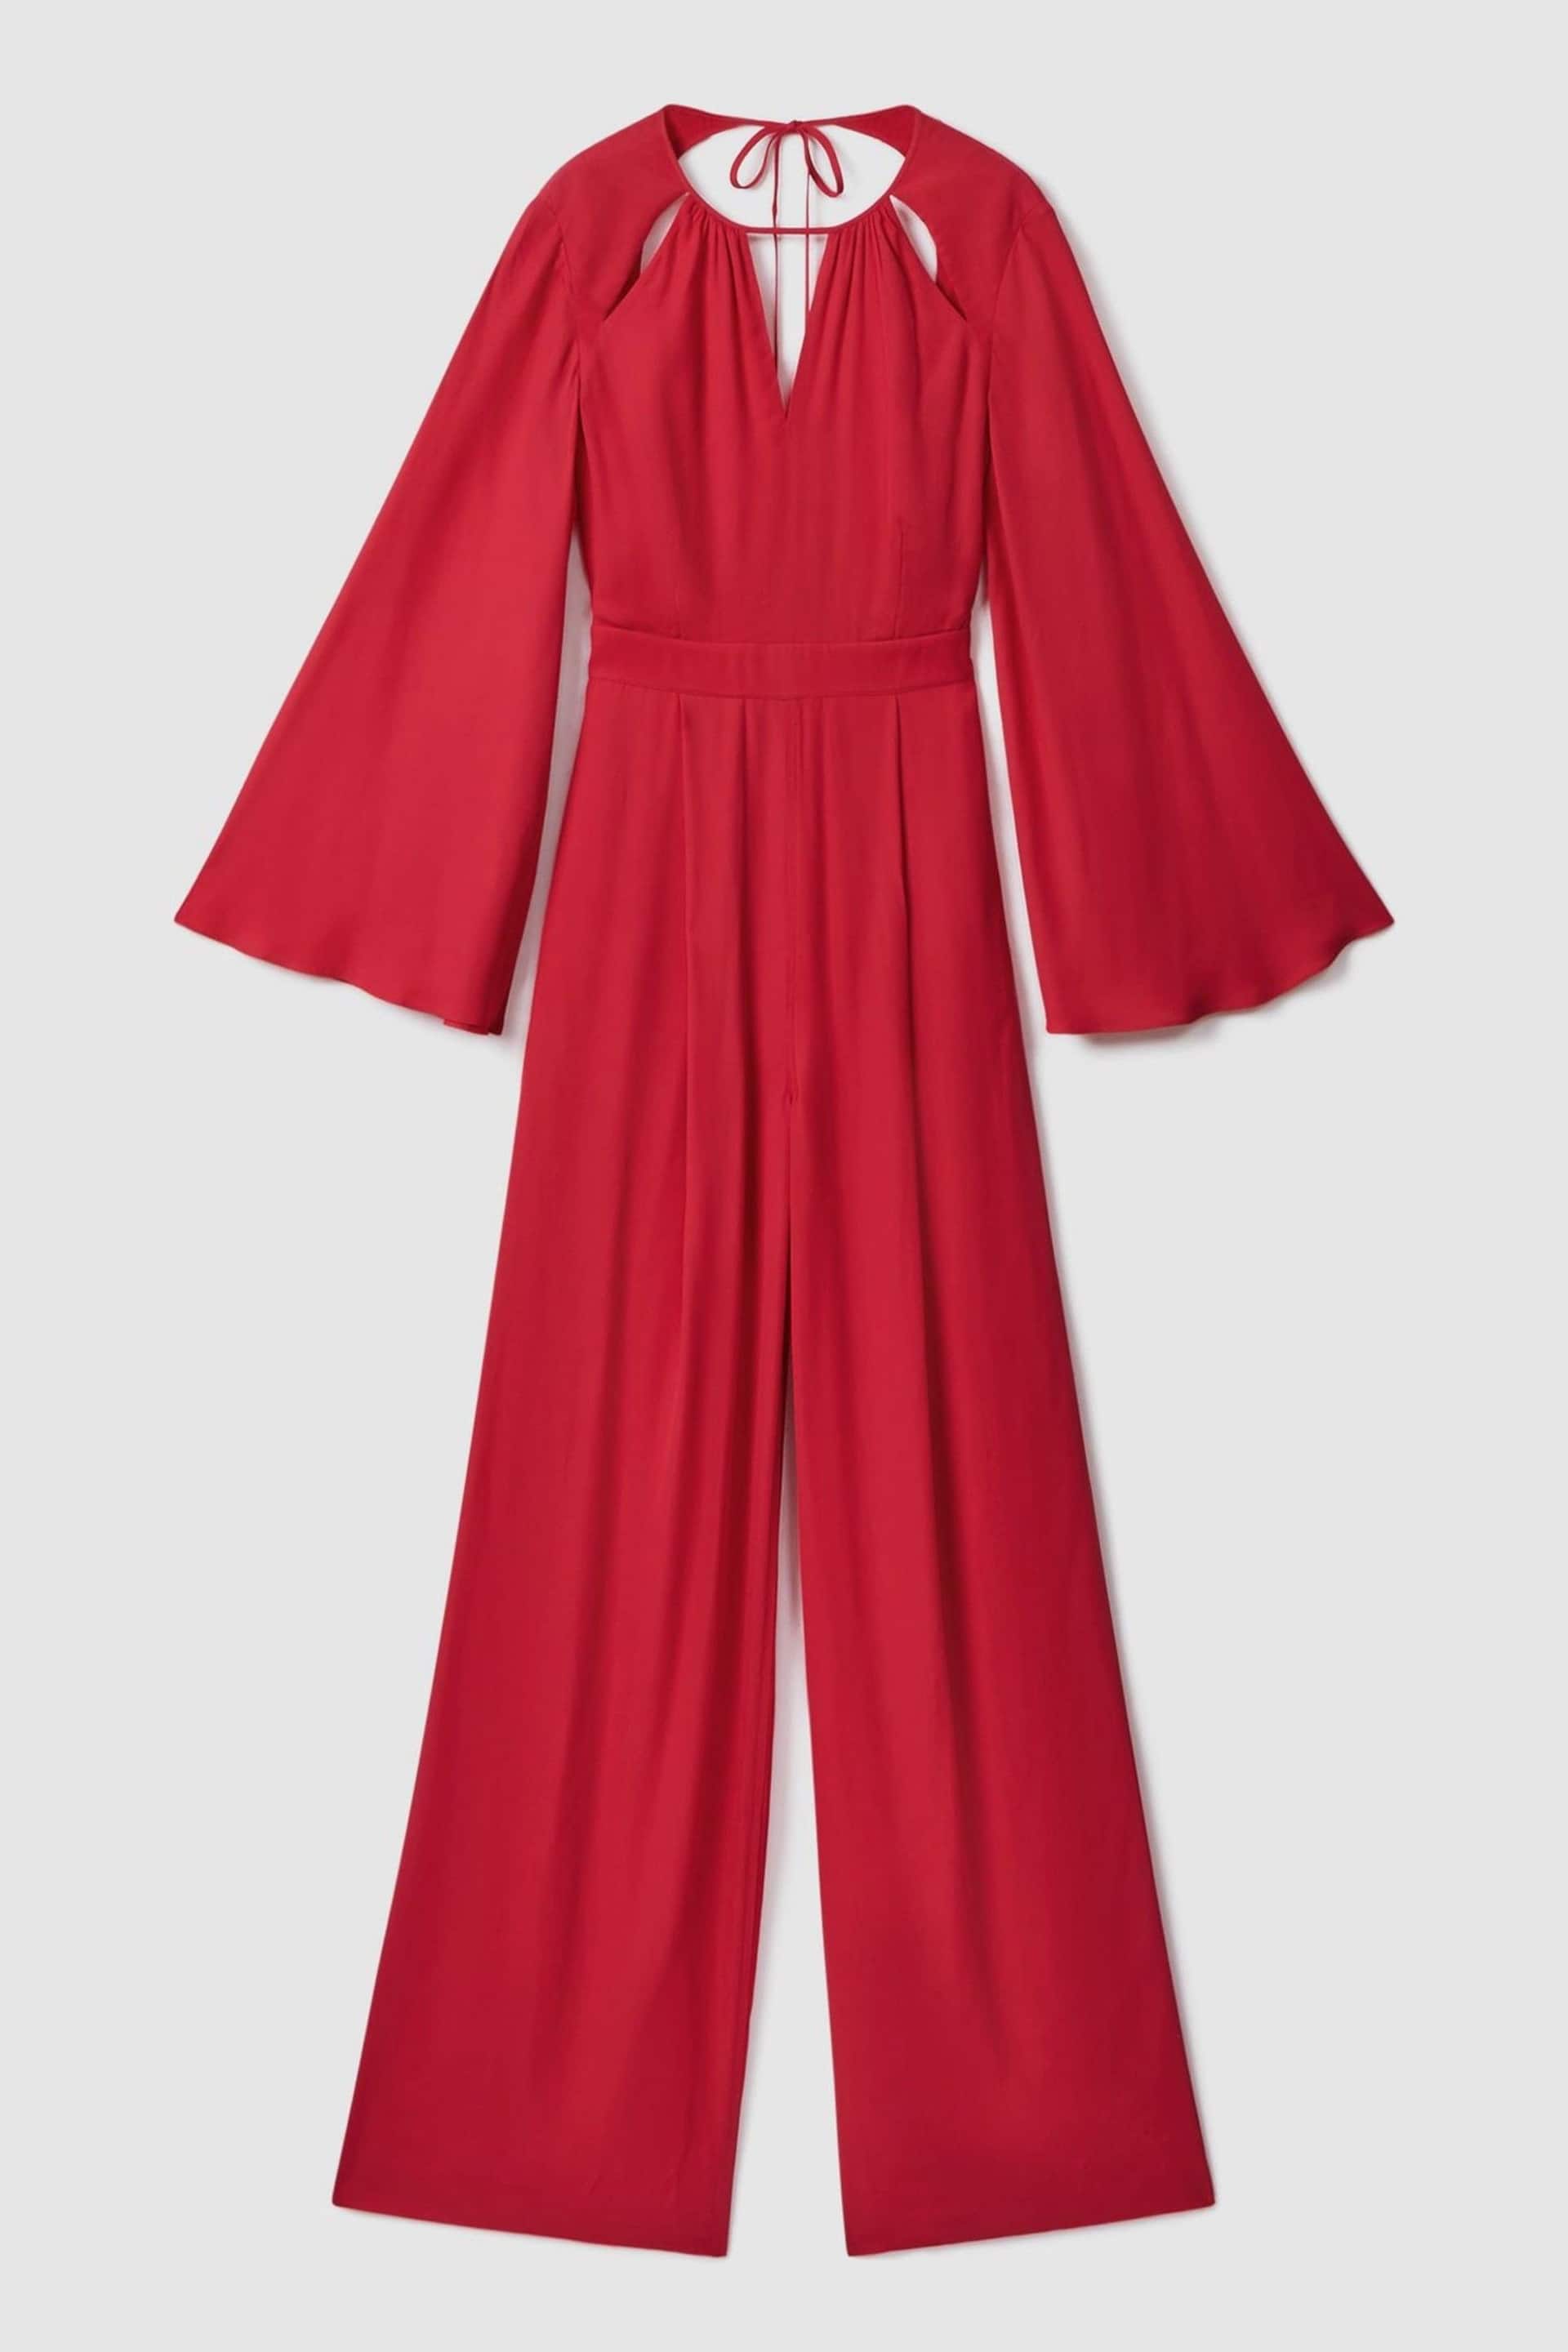 Reiss Coral Tania Cut-Out Flared Sleeve Jumpsuit - Image 2 of 5